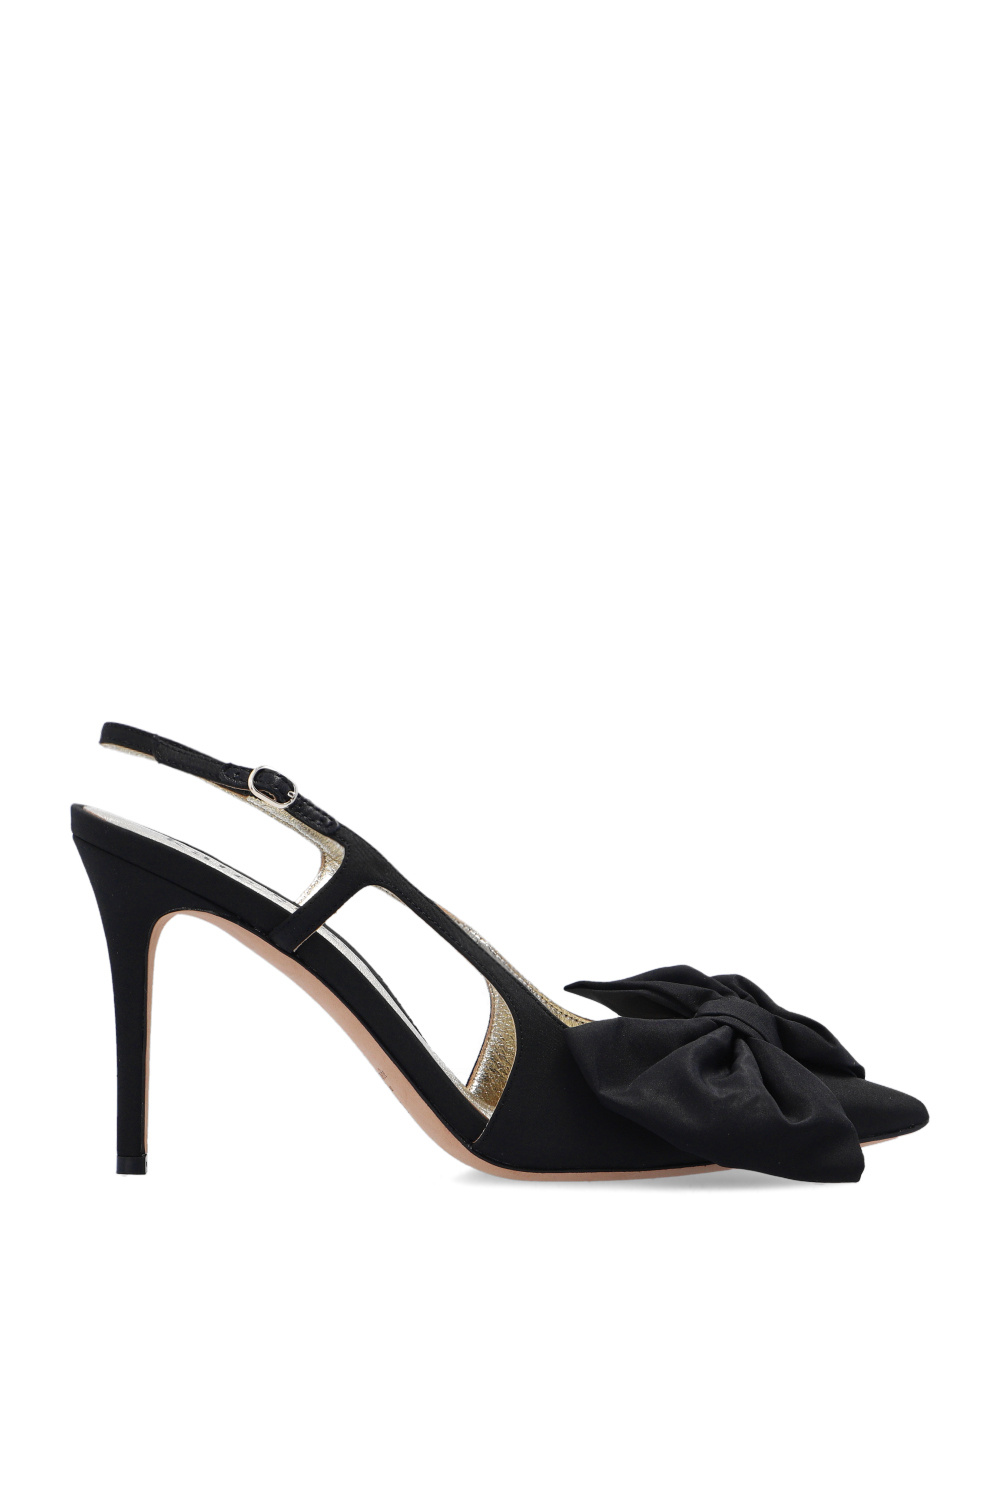 Andy Oliver s Top 25 Sneakers of All-Time - 'Sheela' pumps Kate Spade -  IetpShops Germany